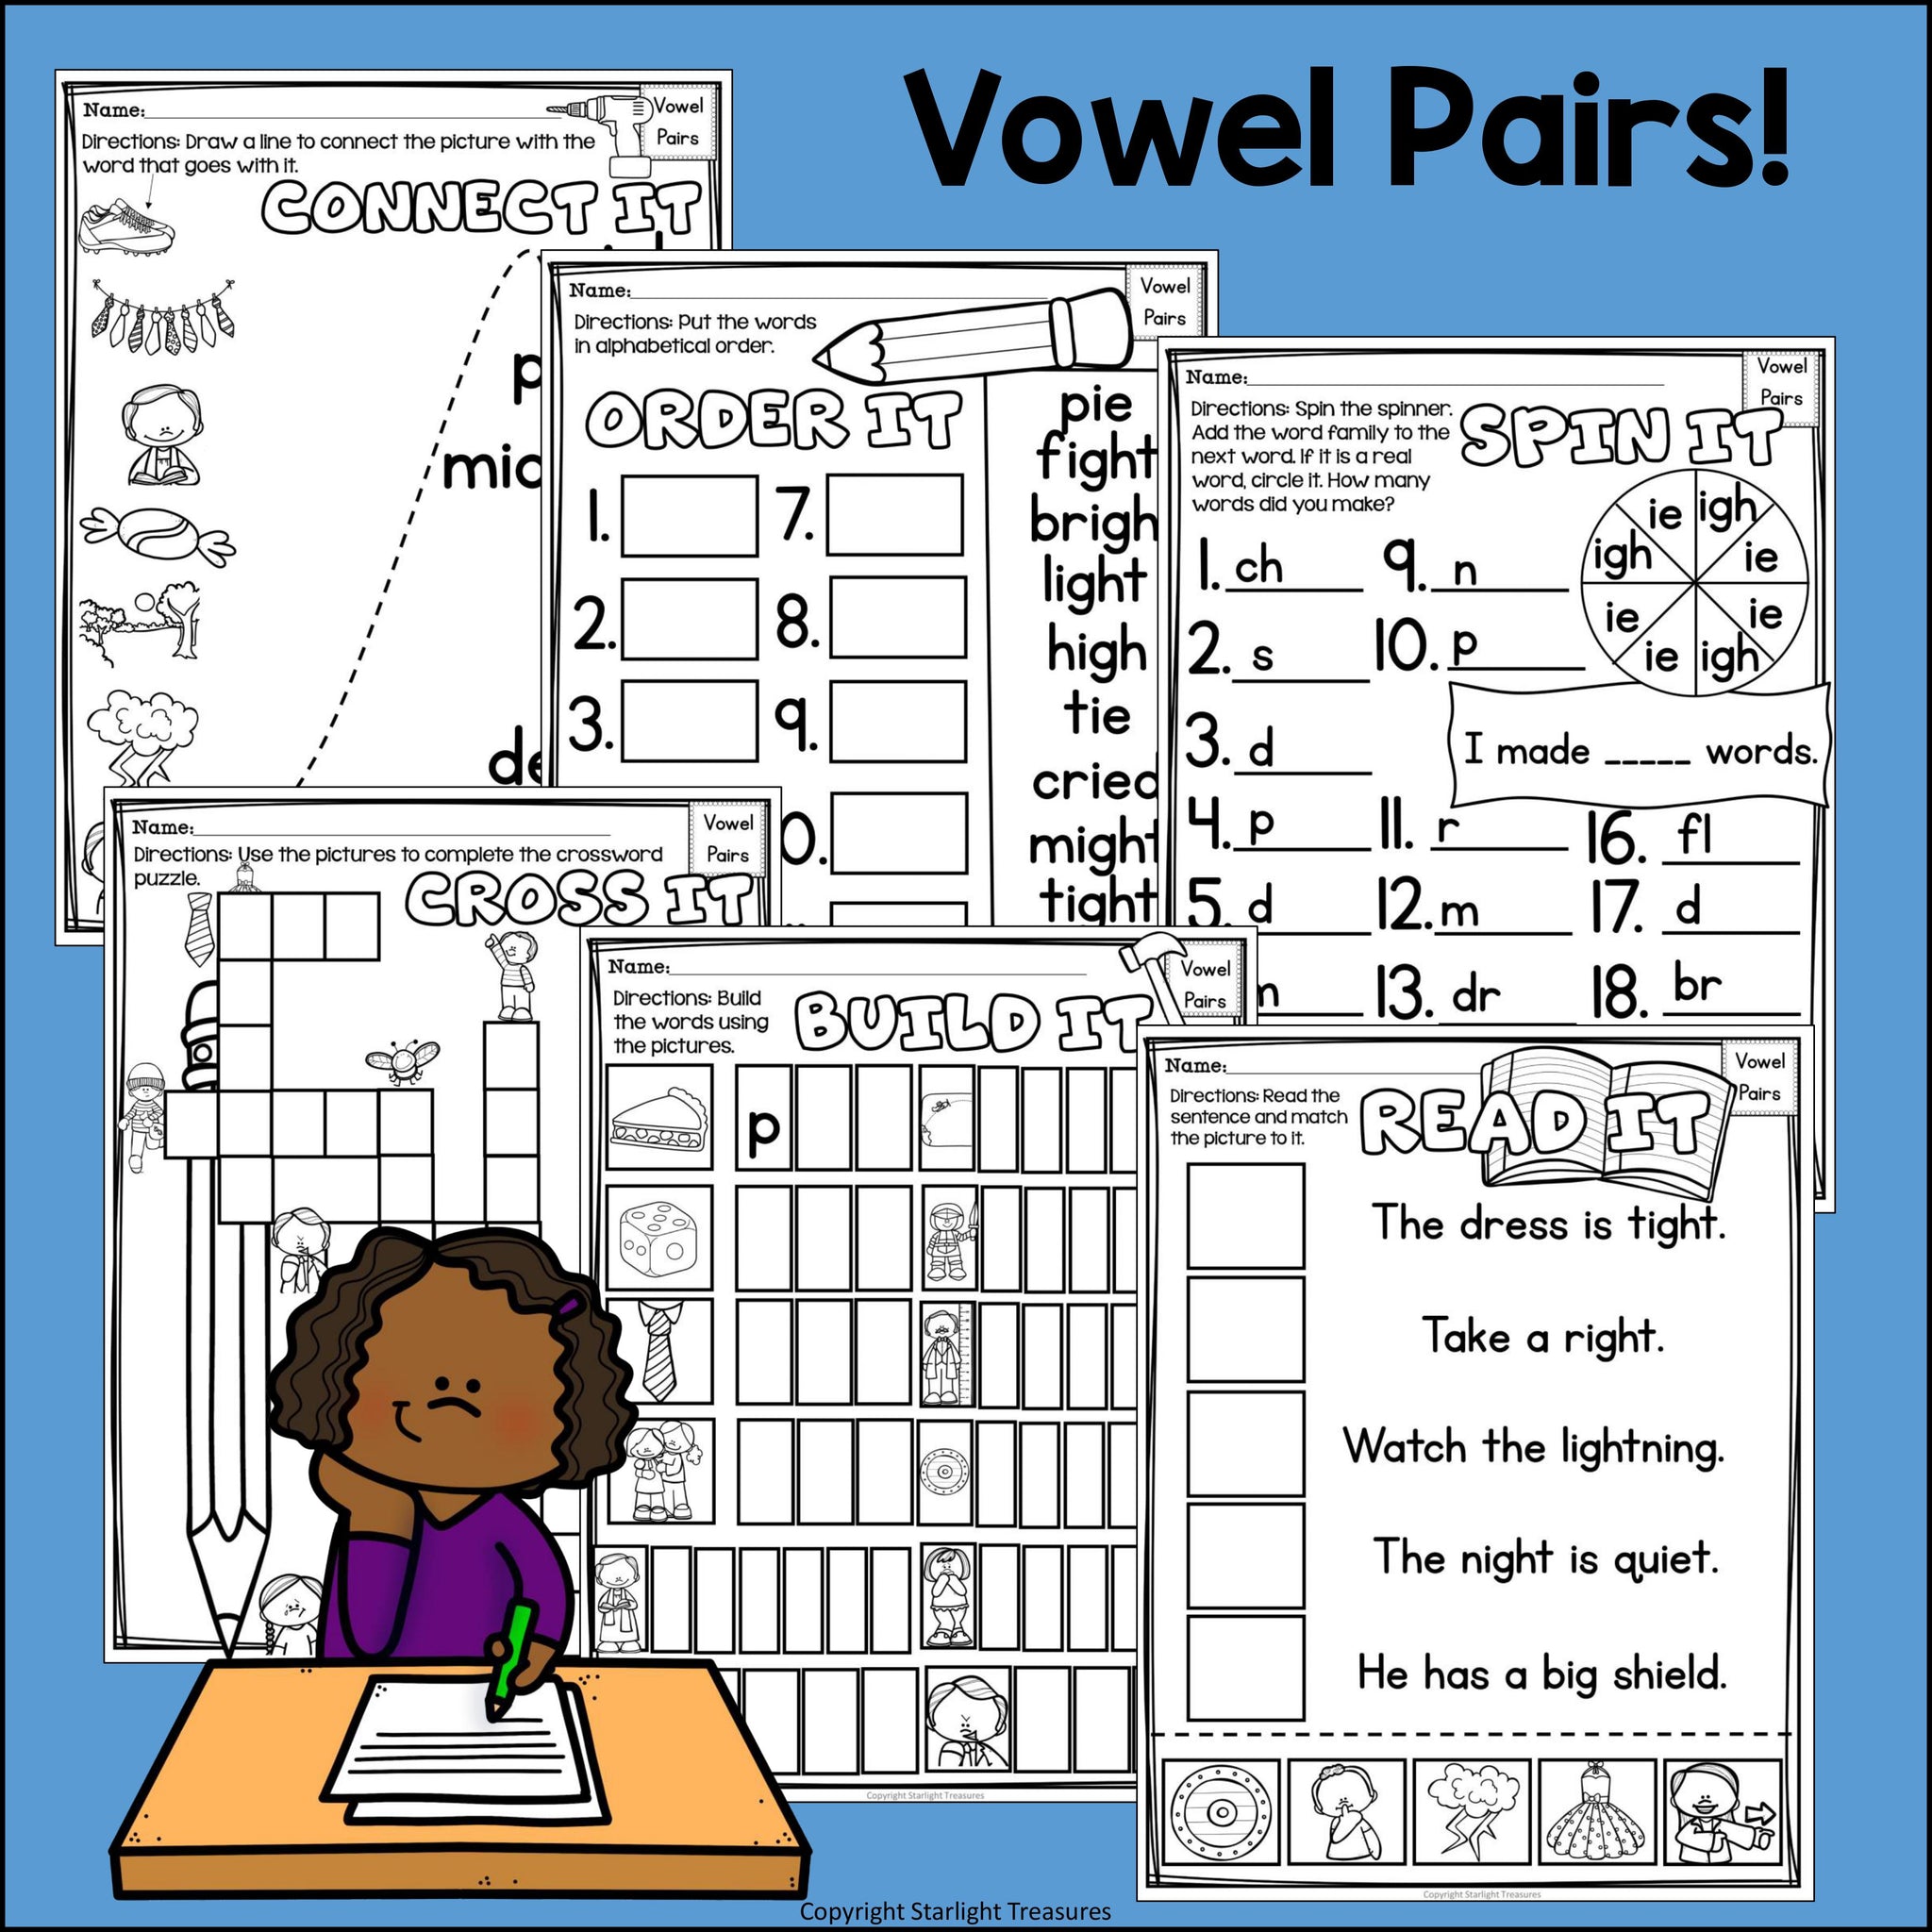 vowel-pairs-igh-ie-worksheets-and-activities-for-early-readers-phon